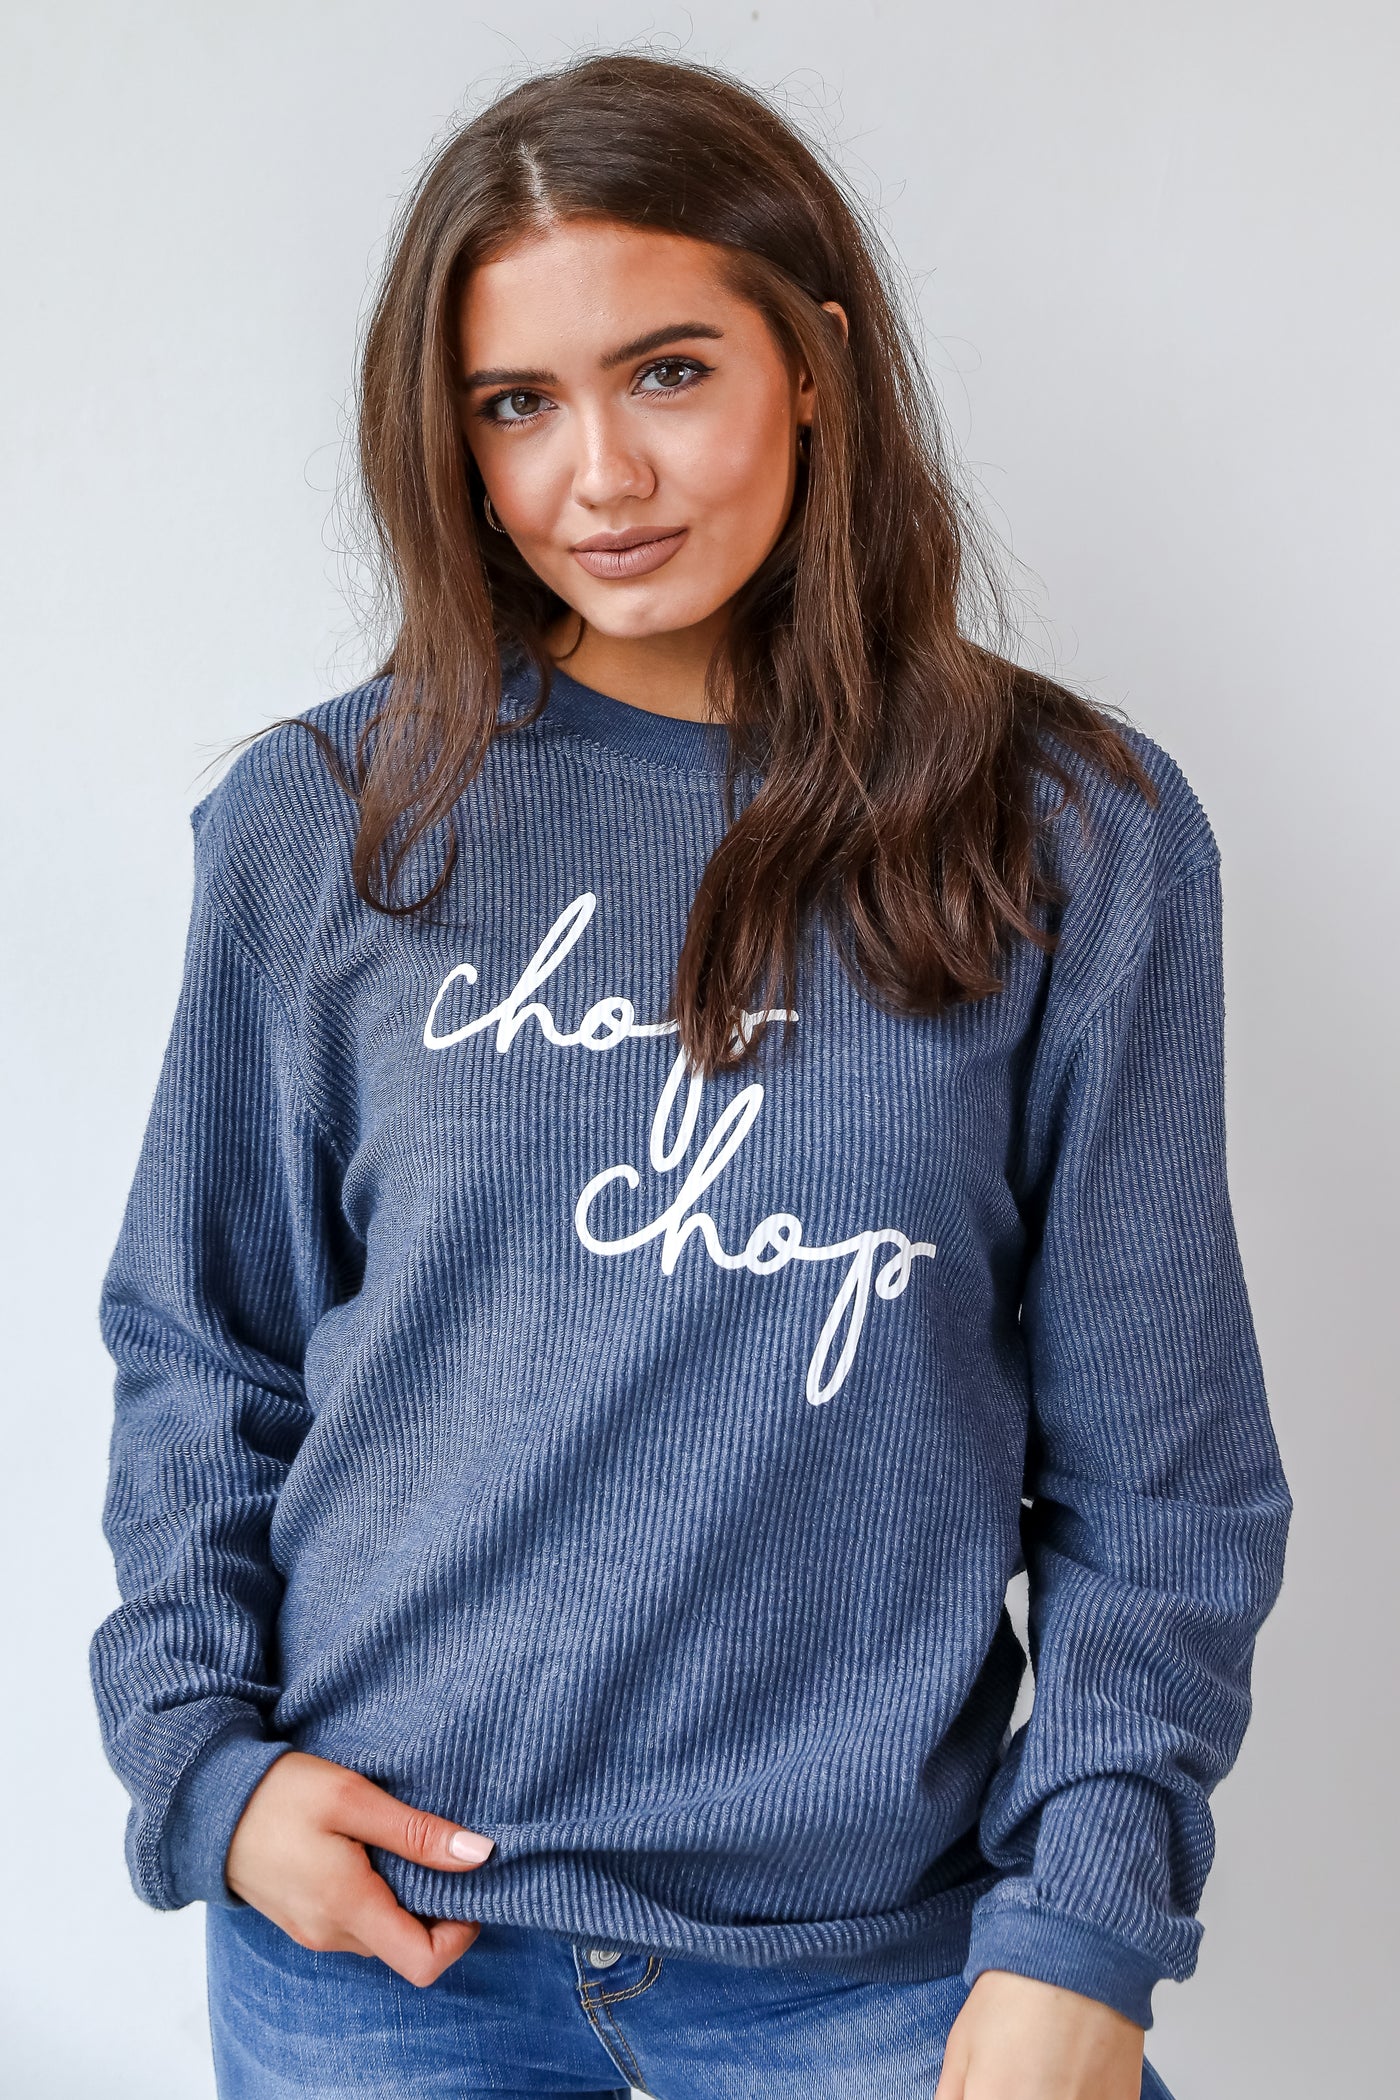 This comfy sweatshirt is designed with a soft and stretchy corded knit. It features a crew neckline, long sleeves, an oversized fit, and the words "Chop Chop" on the front.